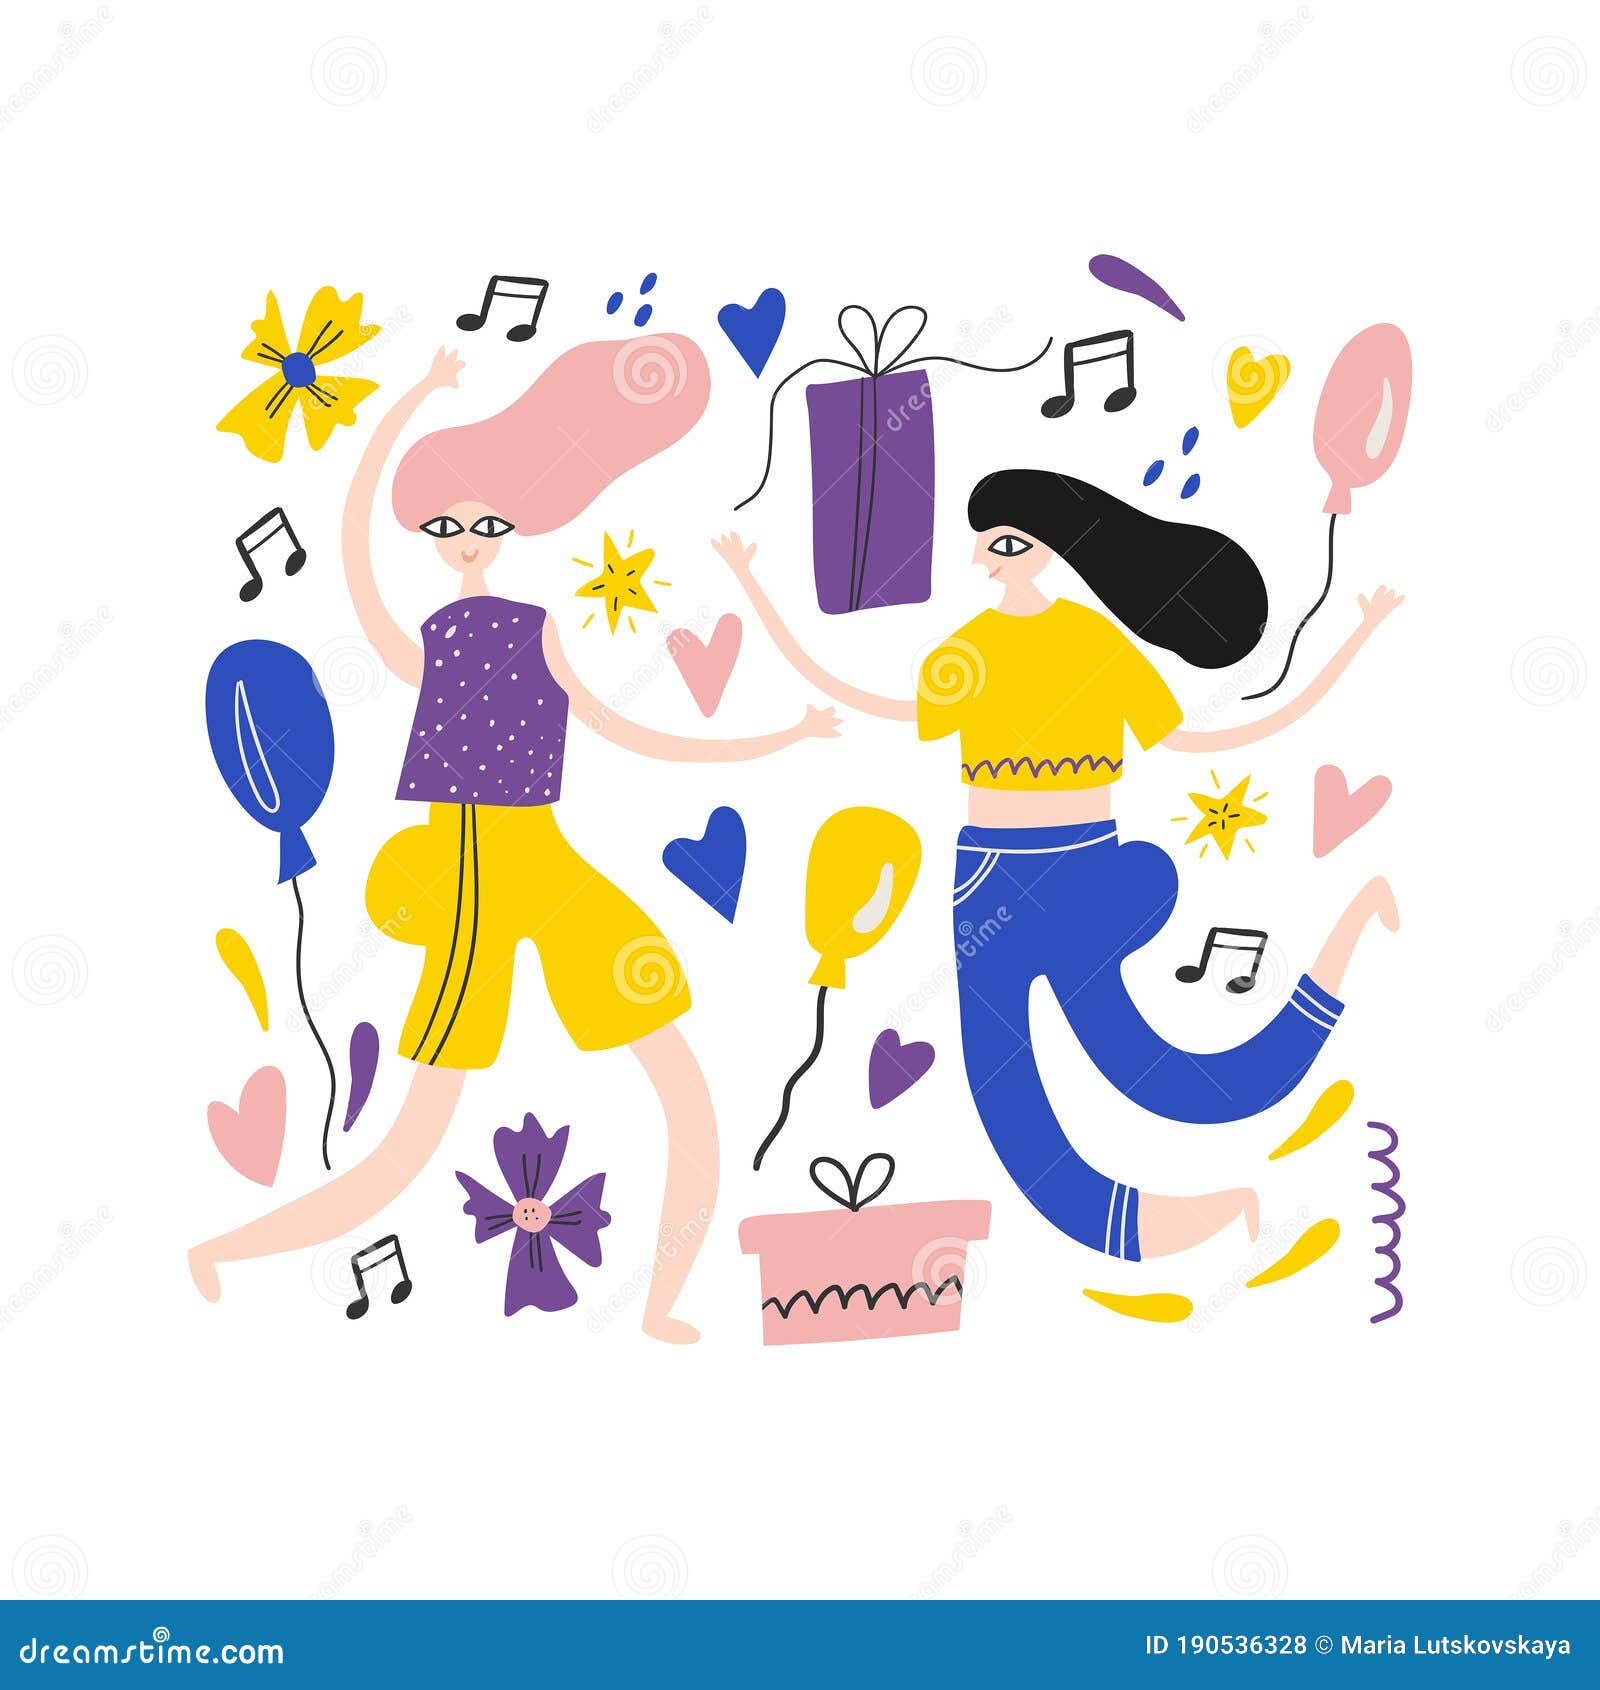 Girls Dansing. Women Have Fun on Party Stock Vector - Illustration of ...